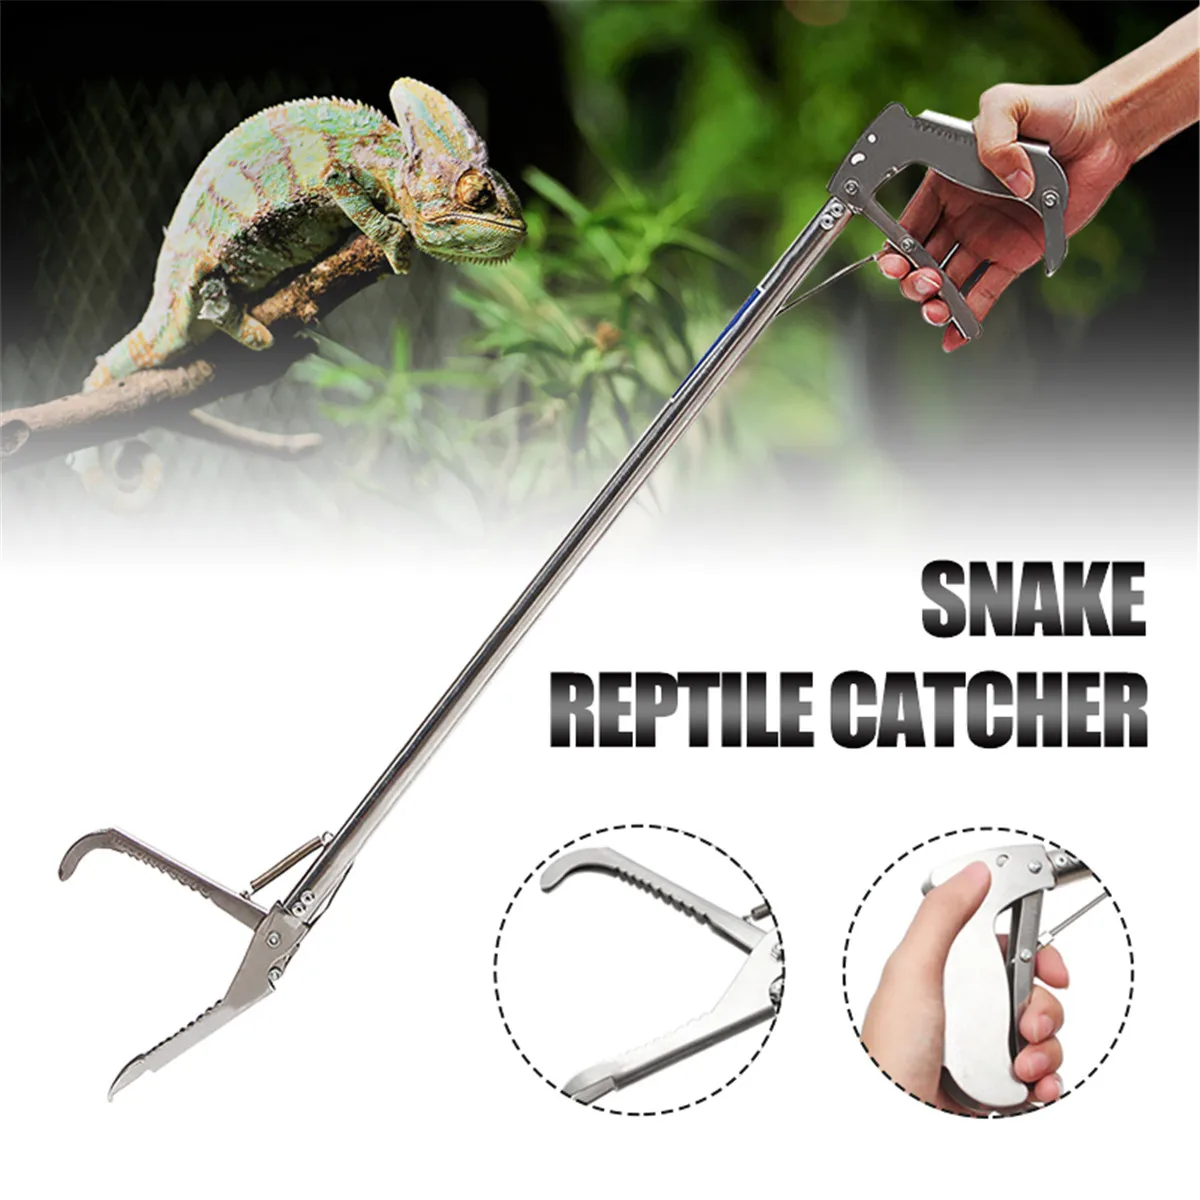 Quickly Reptile Snake Catcher Tongs Stick 120CM/100/75 Professional Stainless Steel Pest Control Product Grabber Wide Jaw Tool